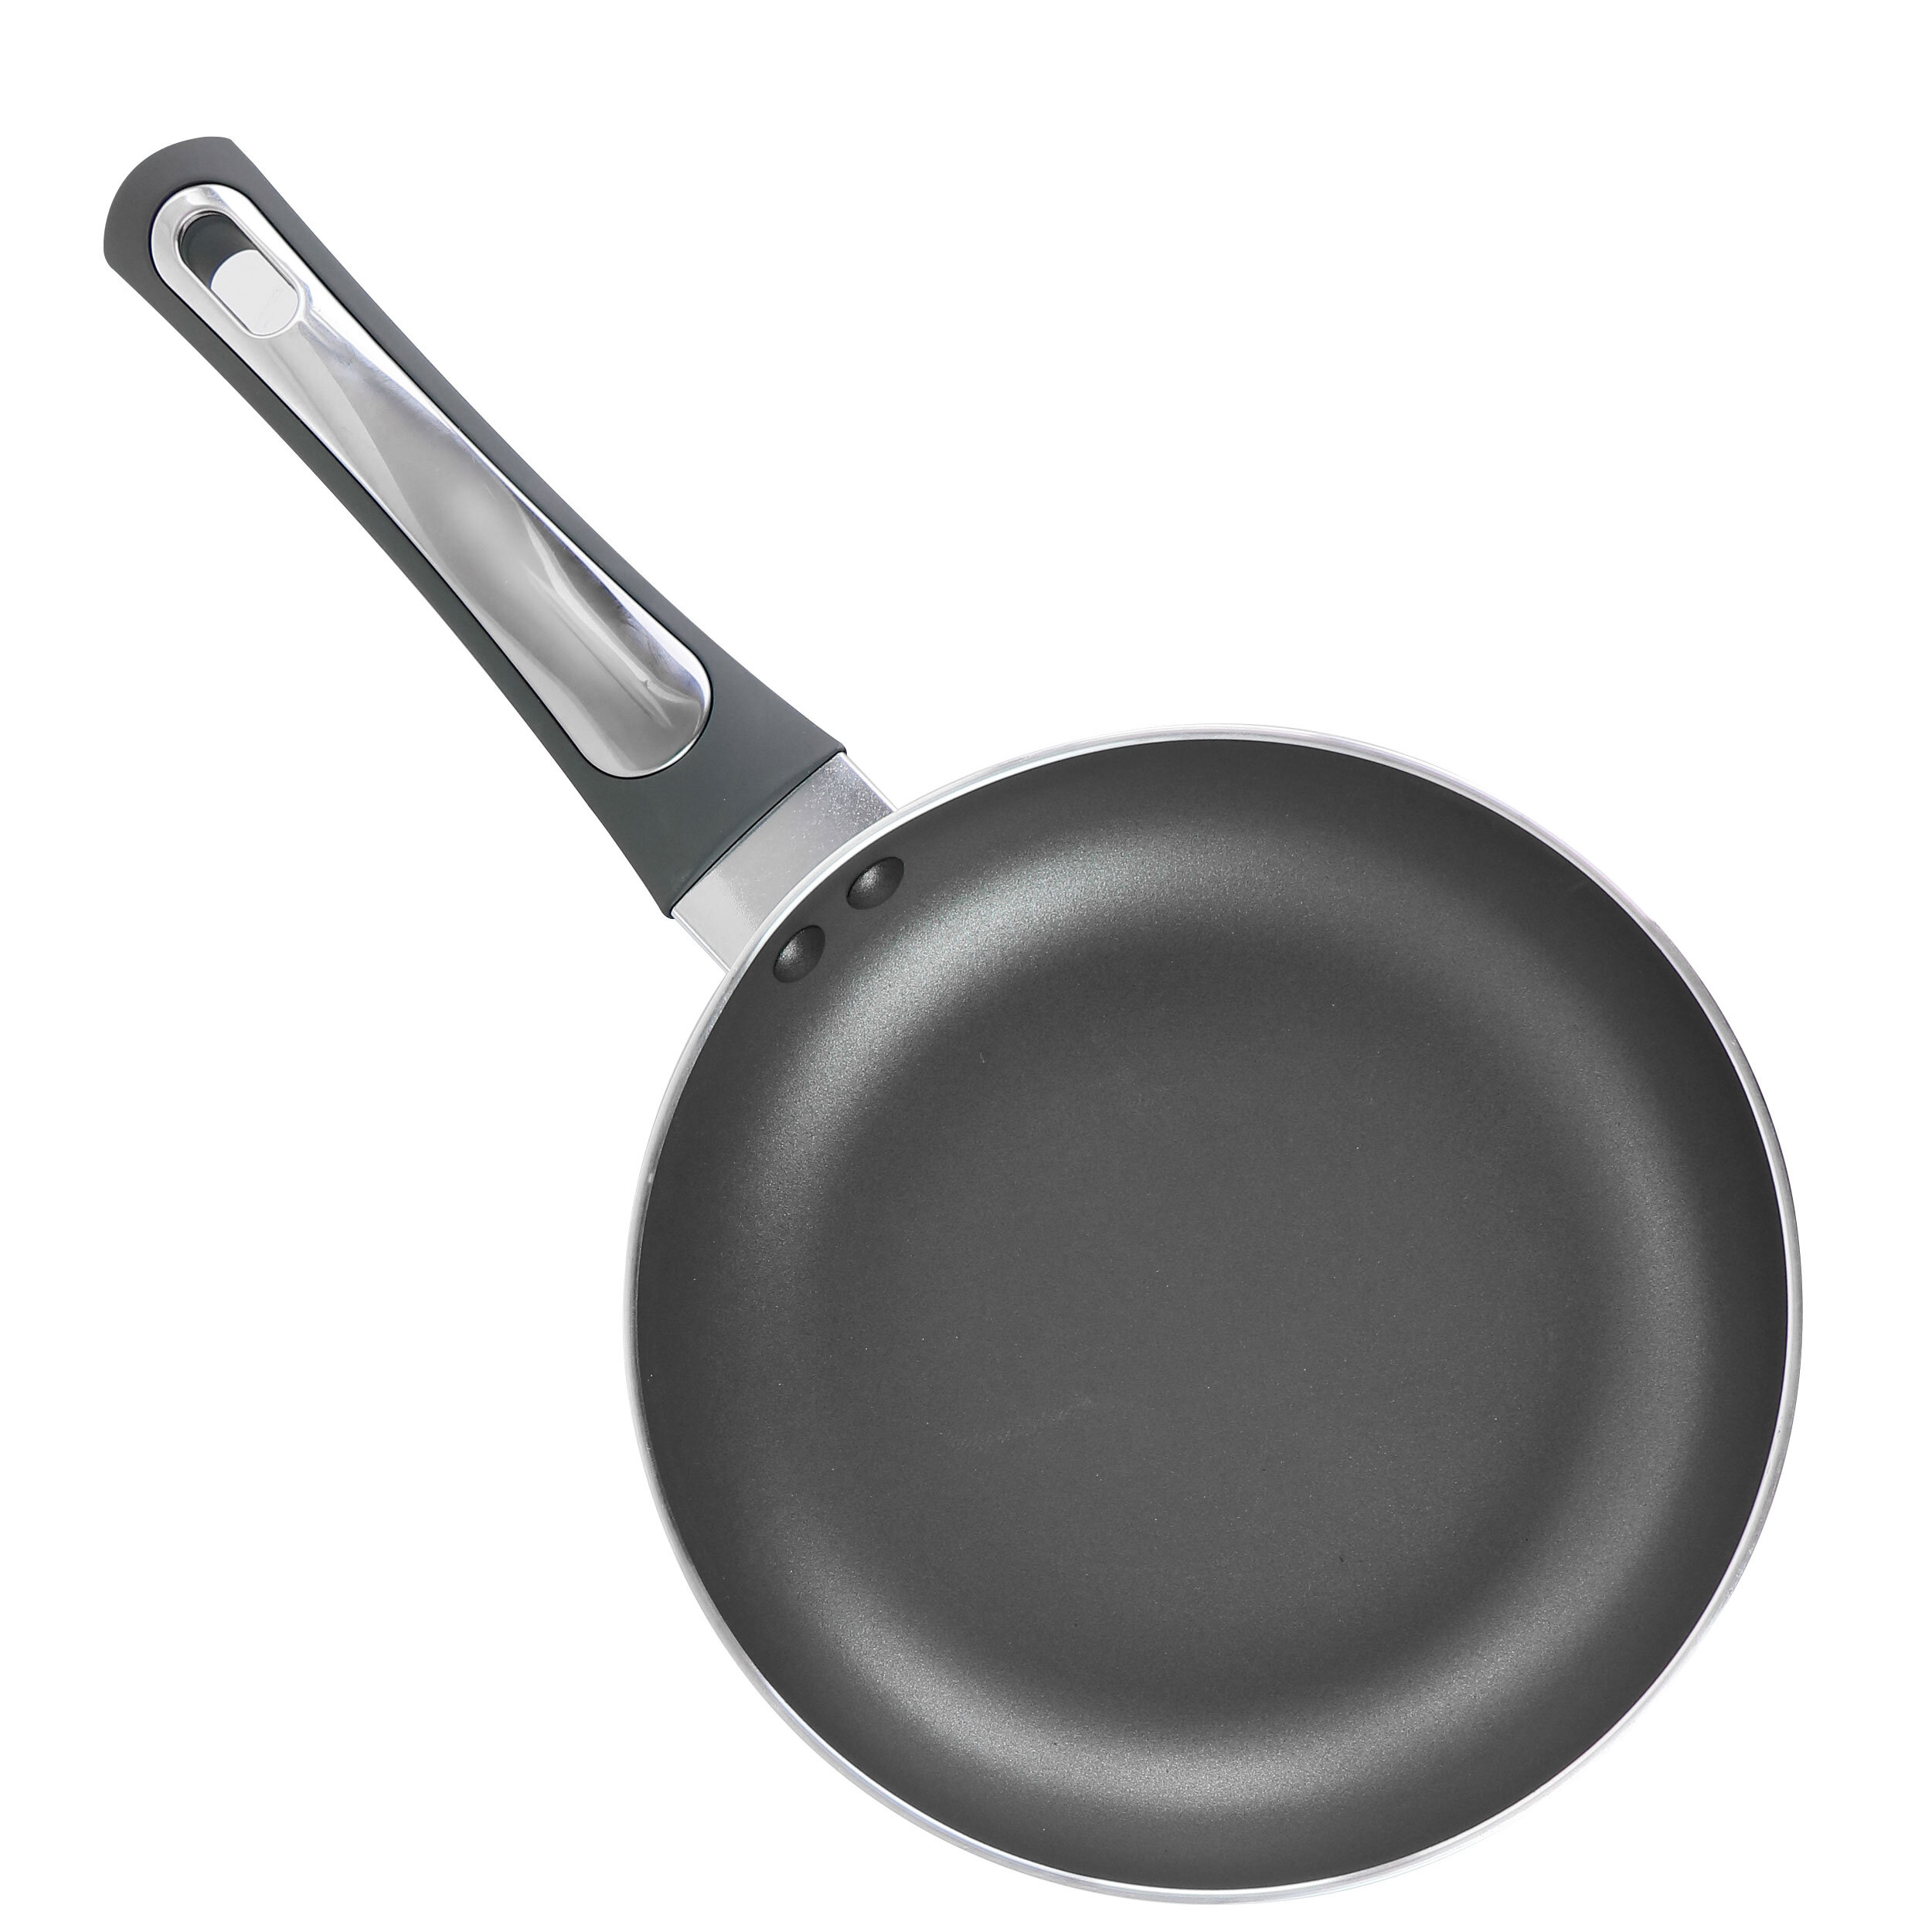  American Kitchen - 8 Inch Premium Nonstick Skillet & Frying  Pan, Stainless Steel, Durable Coating, PFOA-Free, Made in America: Home &  Kitchen